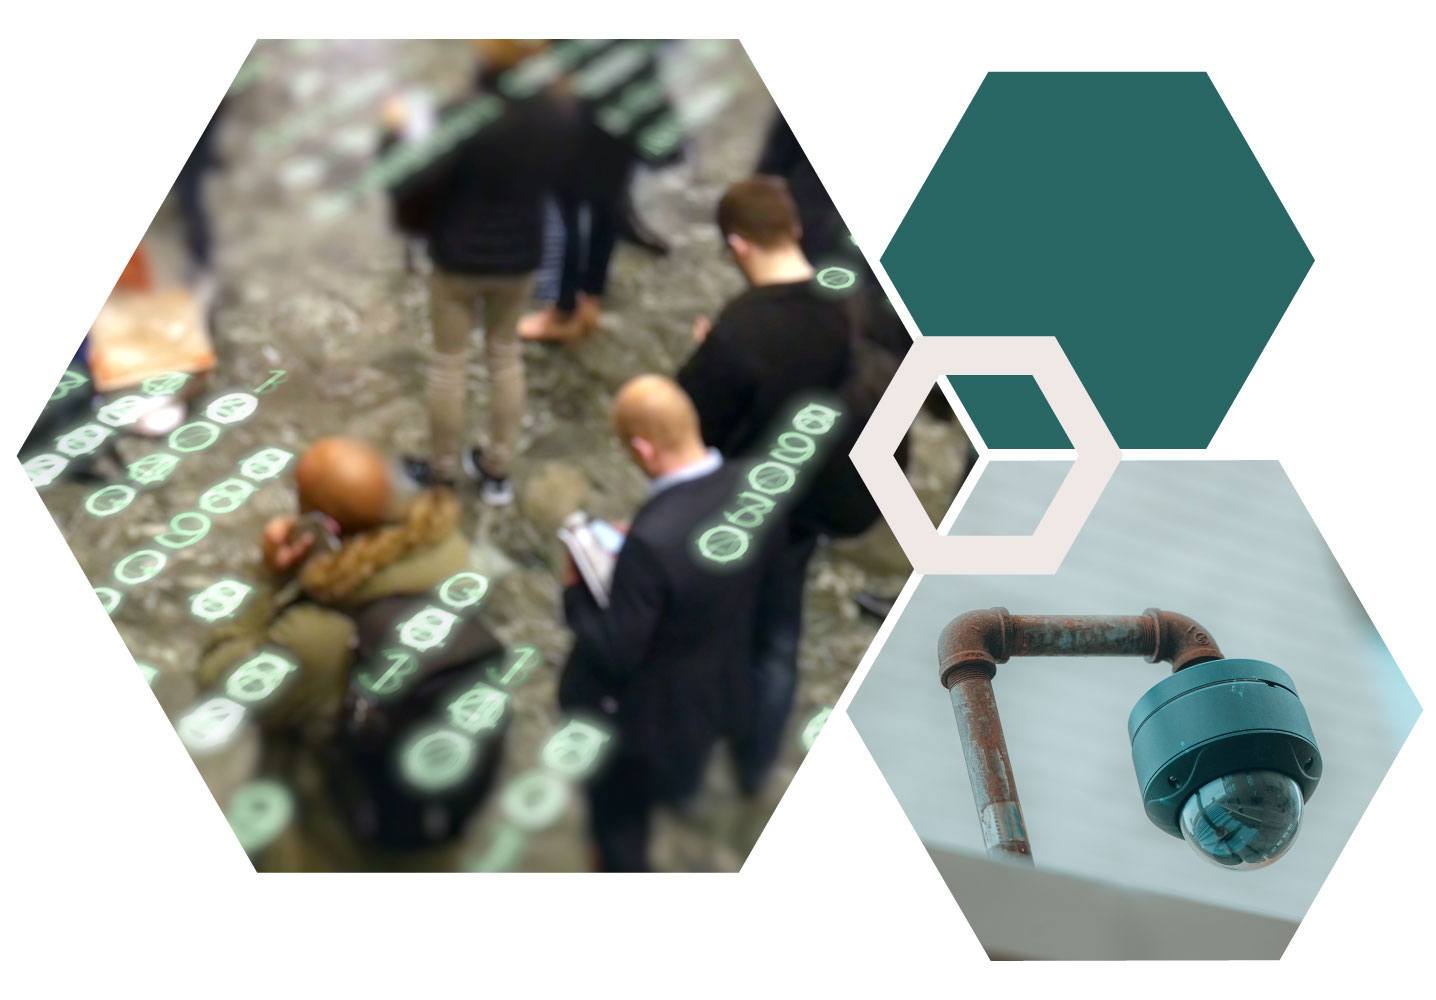 Hexagon collage with image of business people looking at their phones, and an image of a 360 surveillance camera.